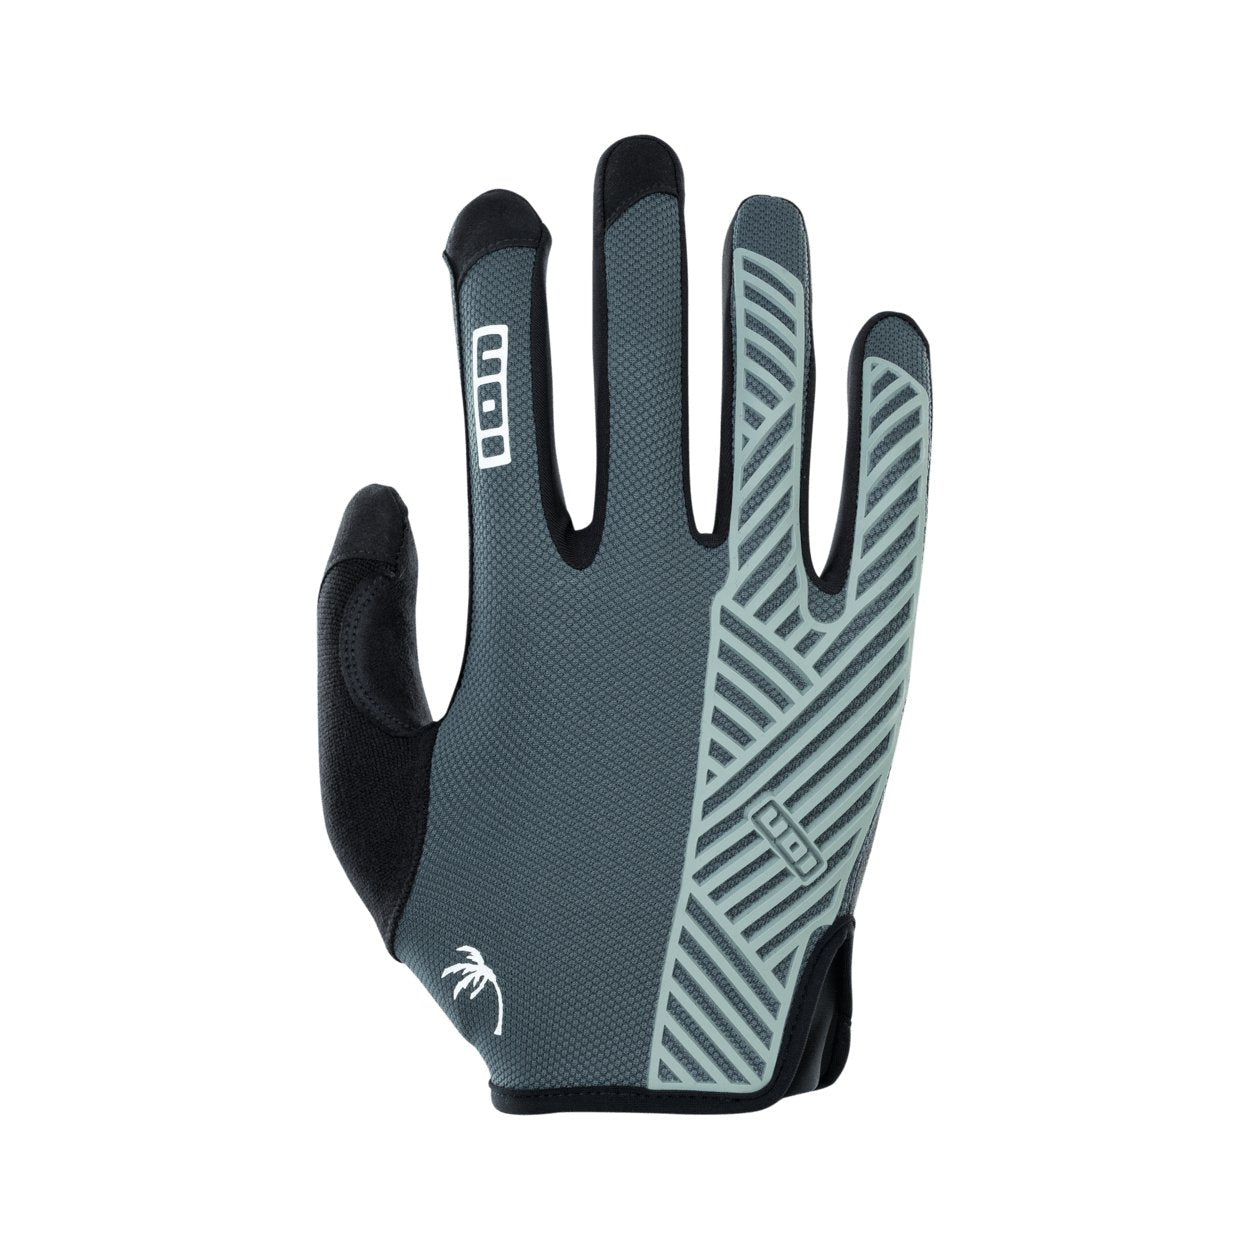 ION MTB Gloves Scrub Select 2024 - Worthing Watersports - 9010583029788 - Gloves - ION Bike